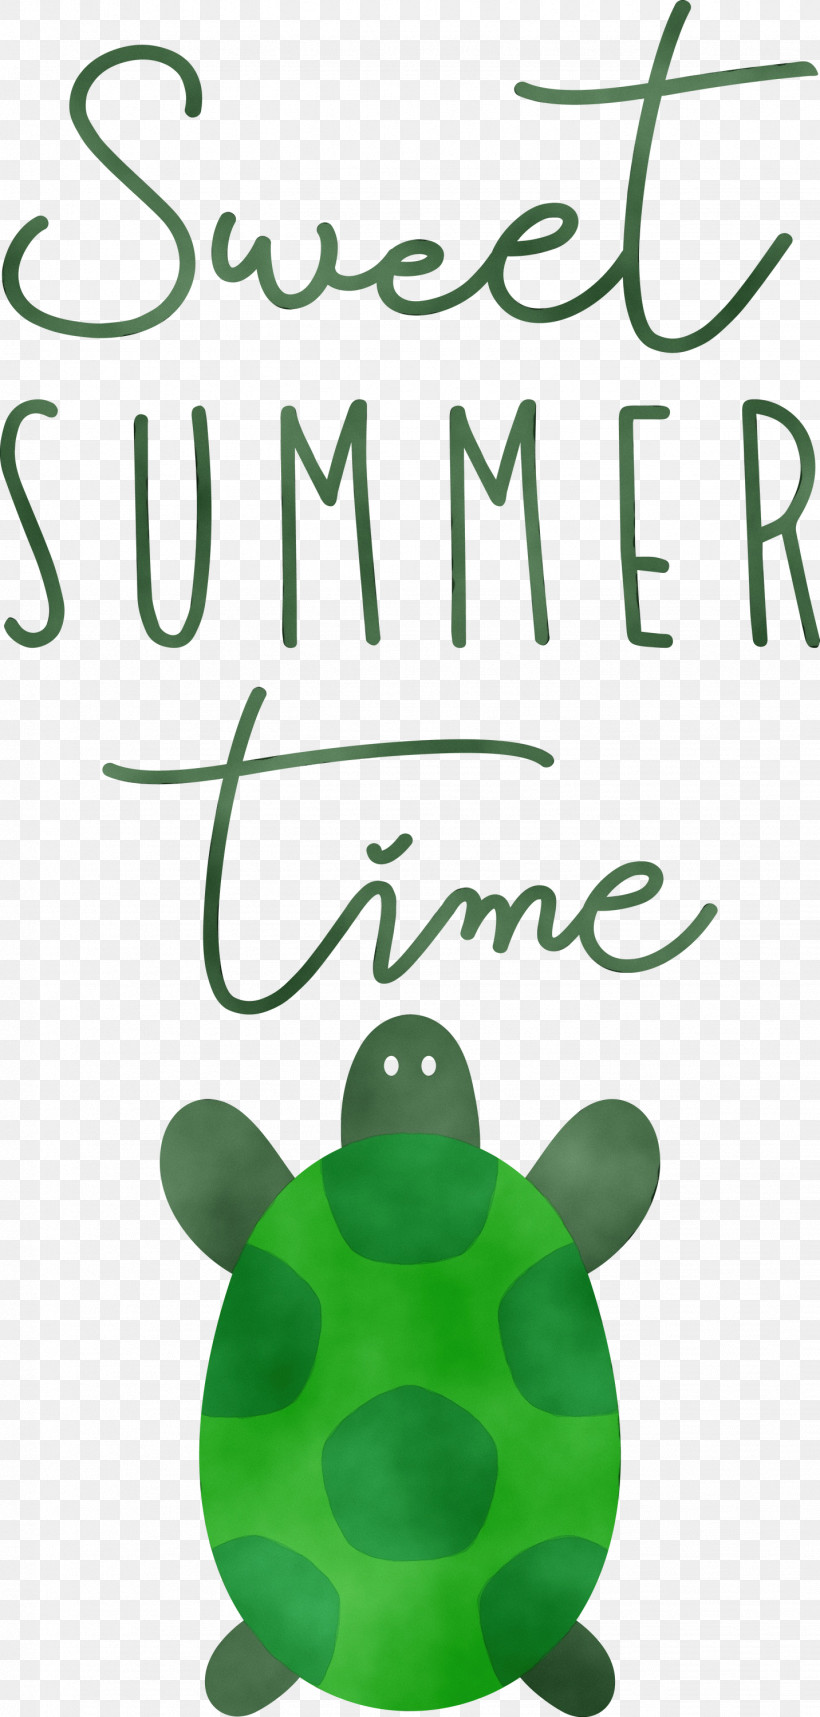 Amphibians Frogs Meter Font Tree, PNG, 1432x3000px, Summer, Amphibians, Biology, Frogs, Meter Download Free